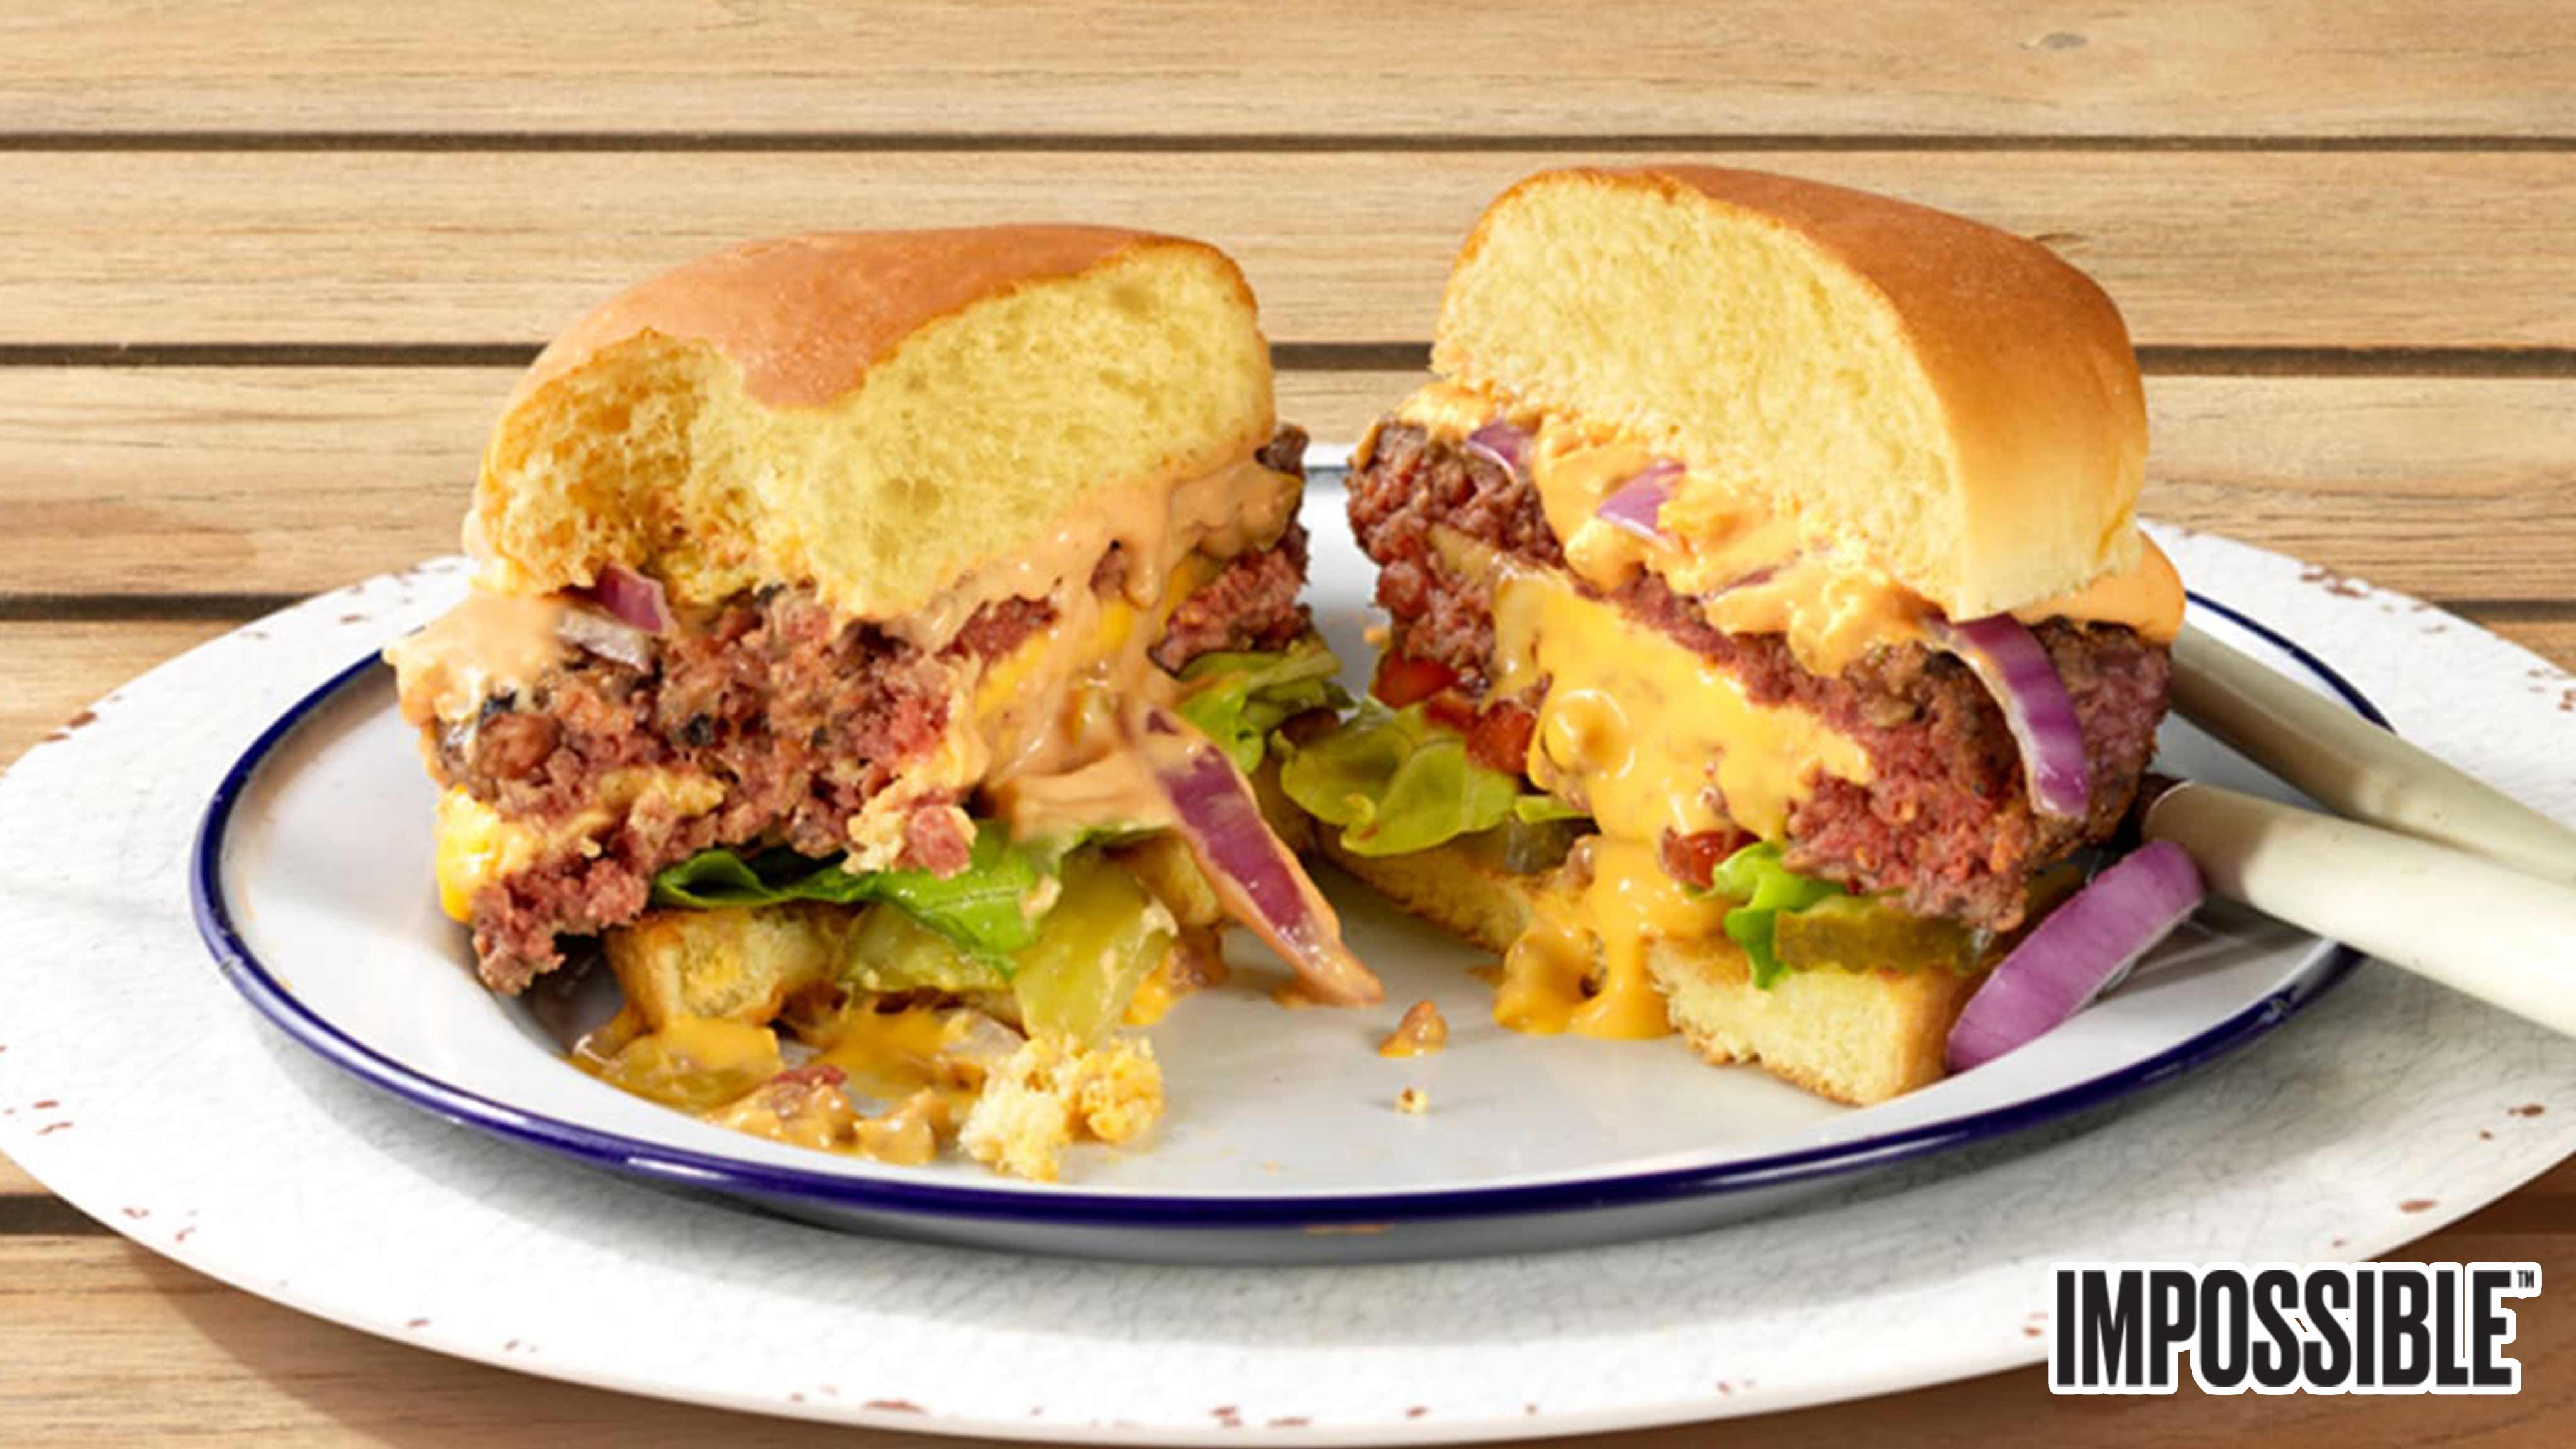 Image for Recipe Impossible Juicy Lucy Burger